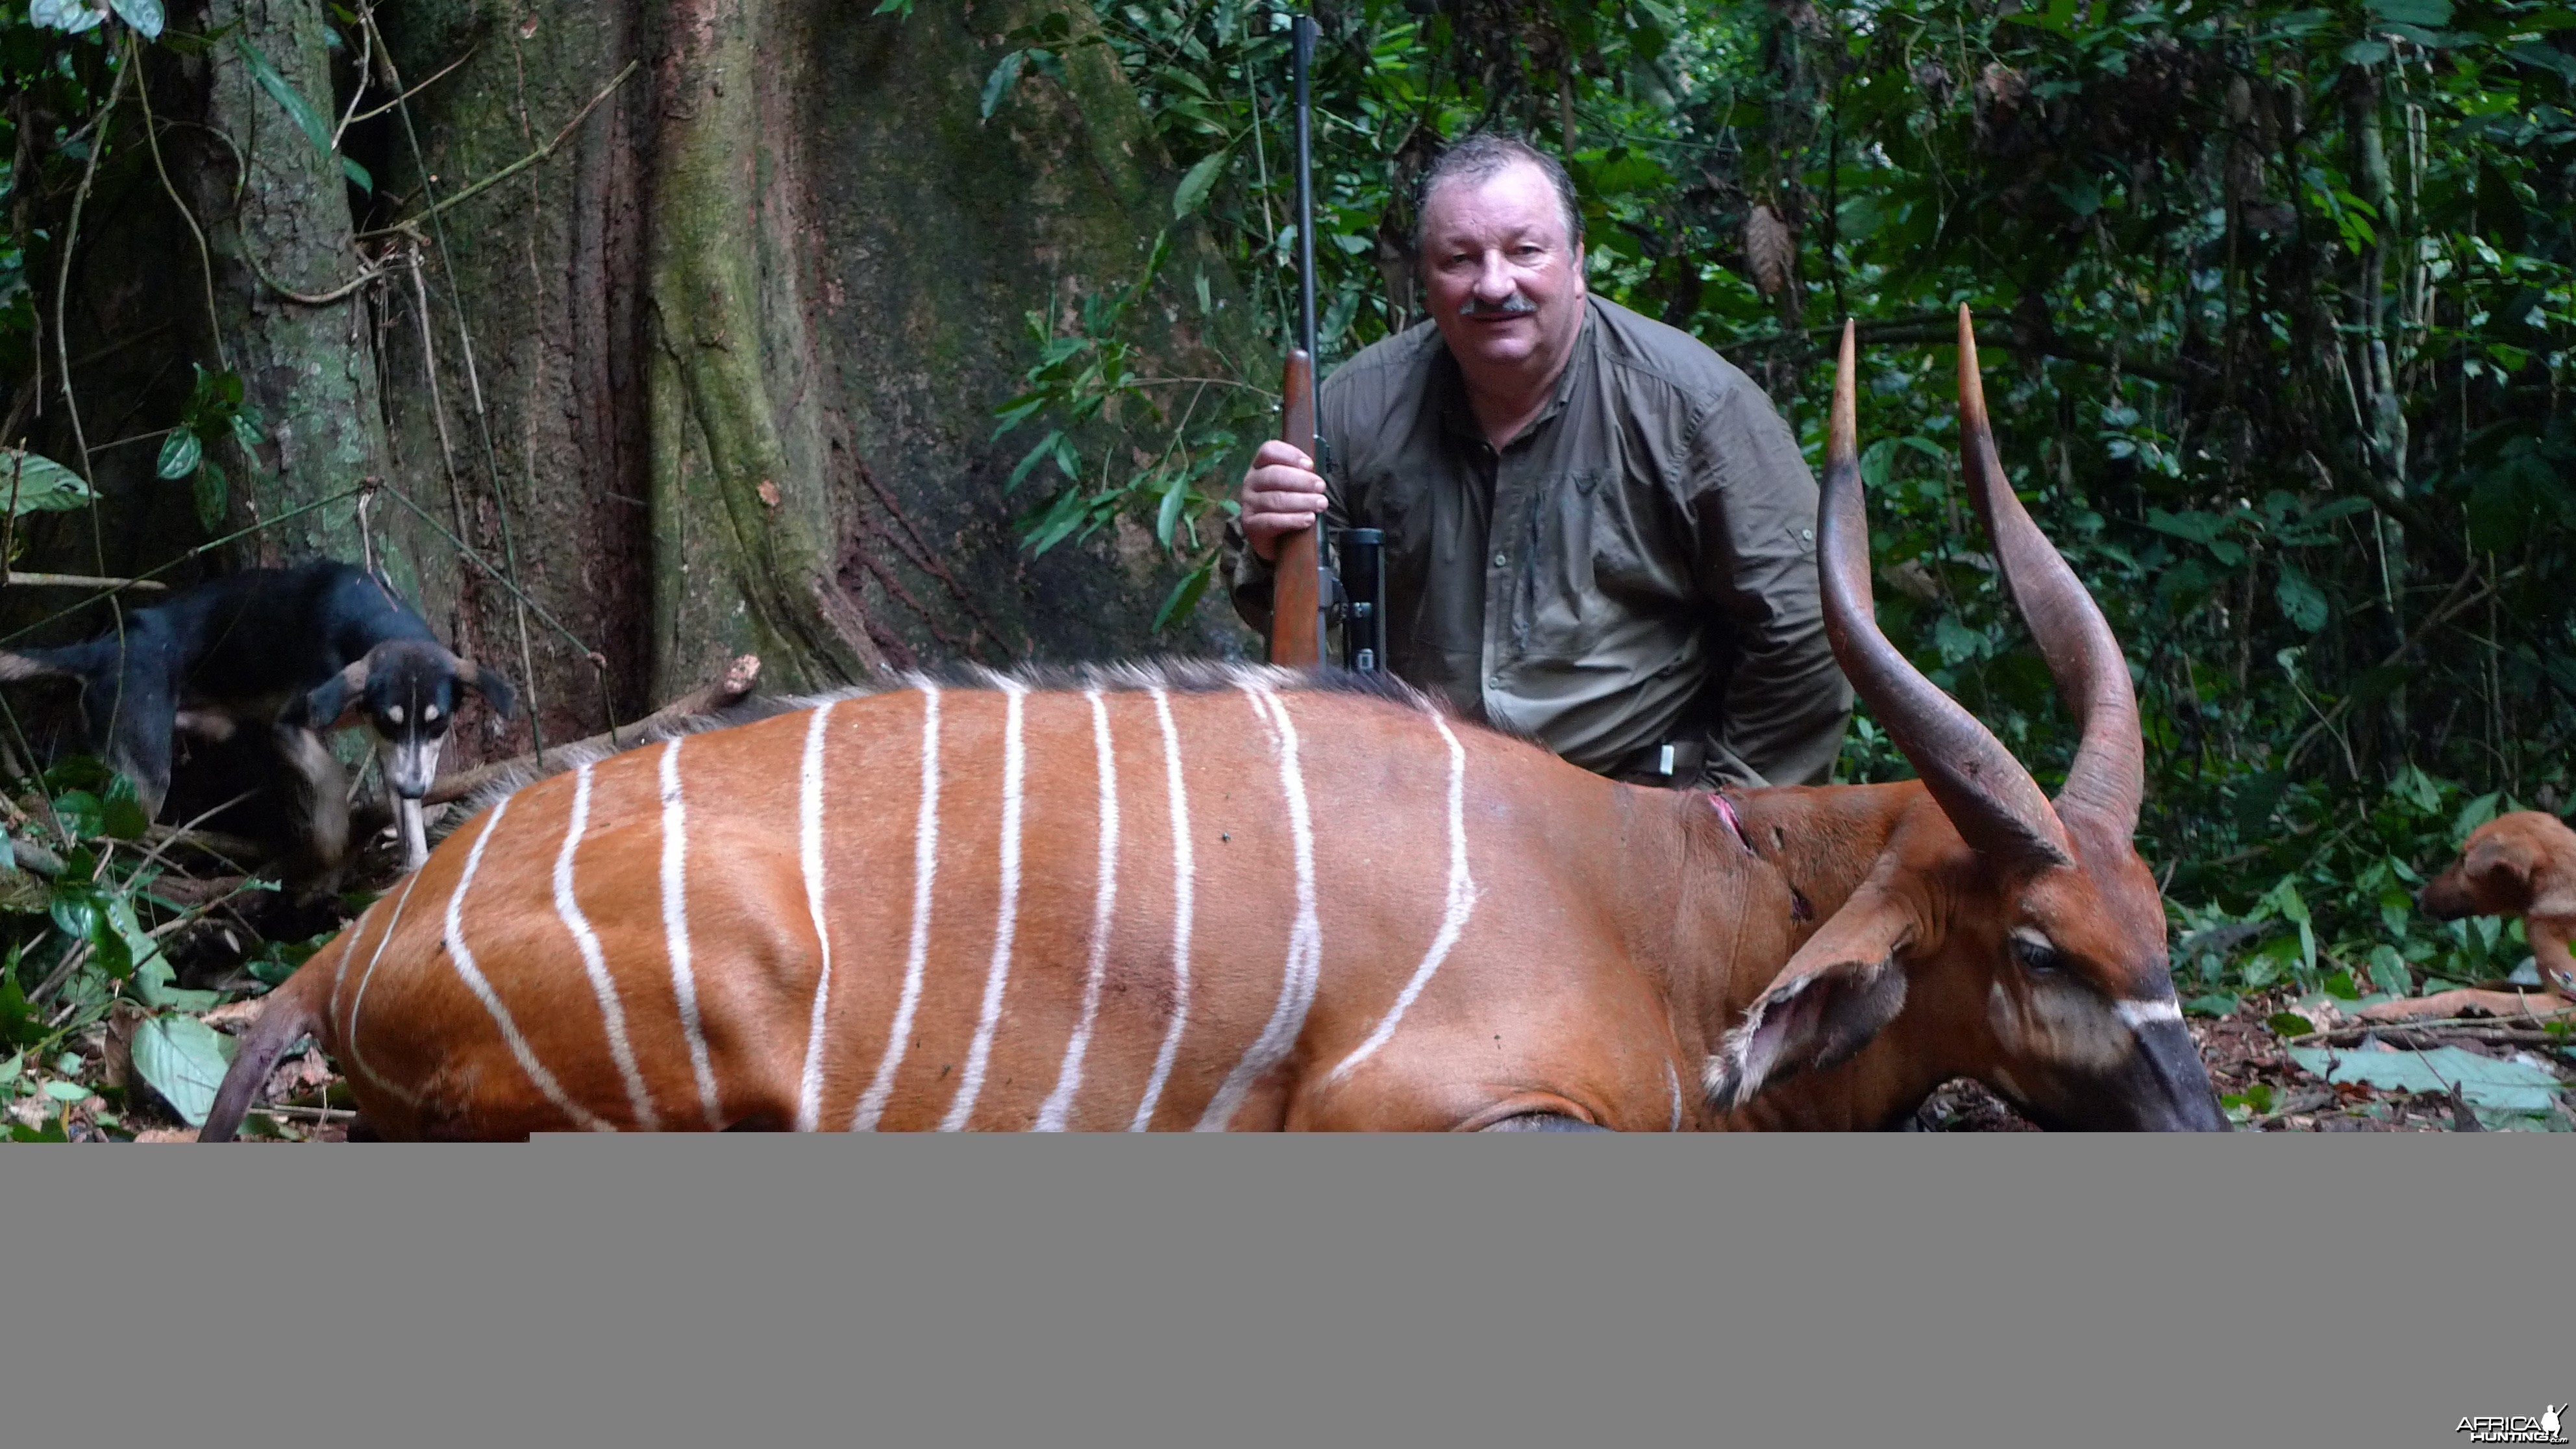 Bongo hunted in Cameroon with Club Faune